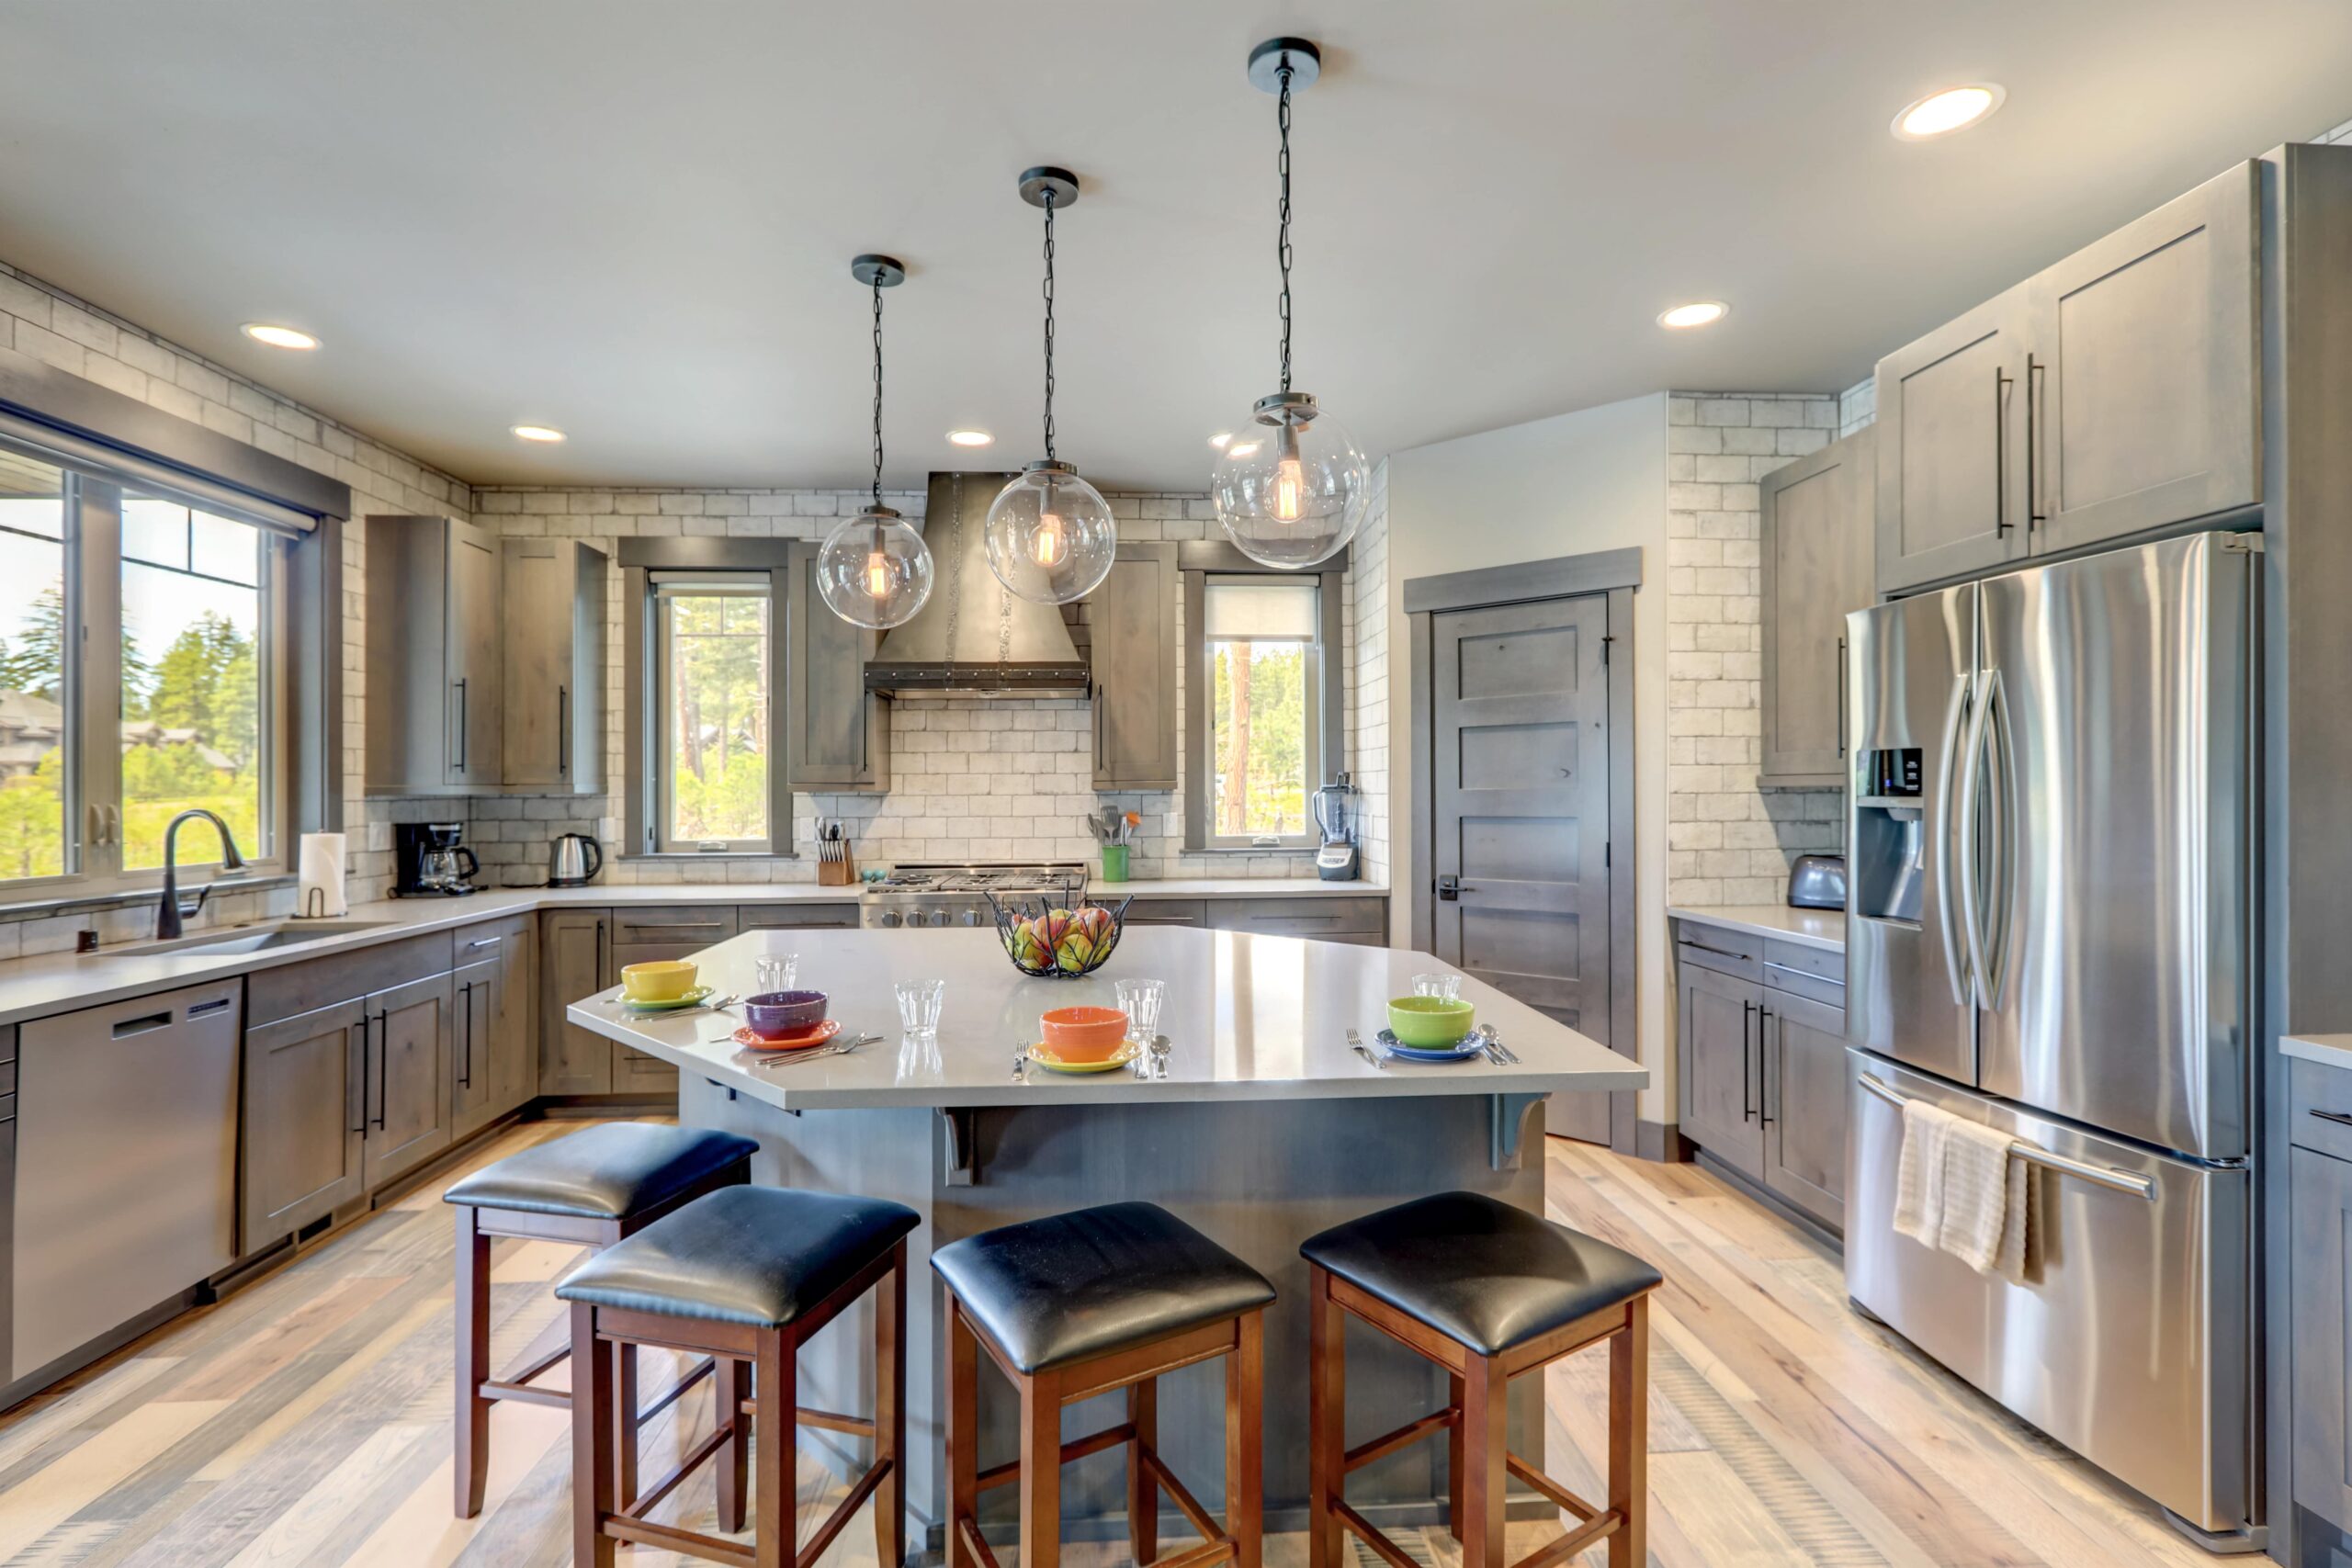 Rustic Kitchen Cabinets: A Timeless Beauty for Modern Kitchens